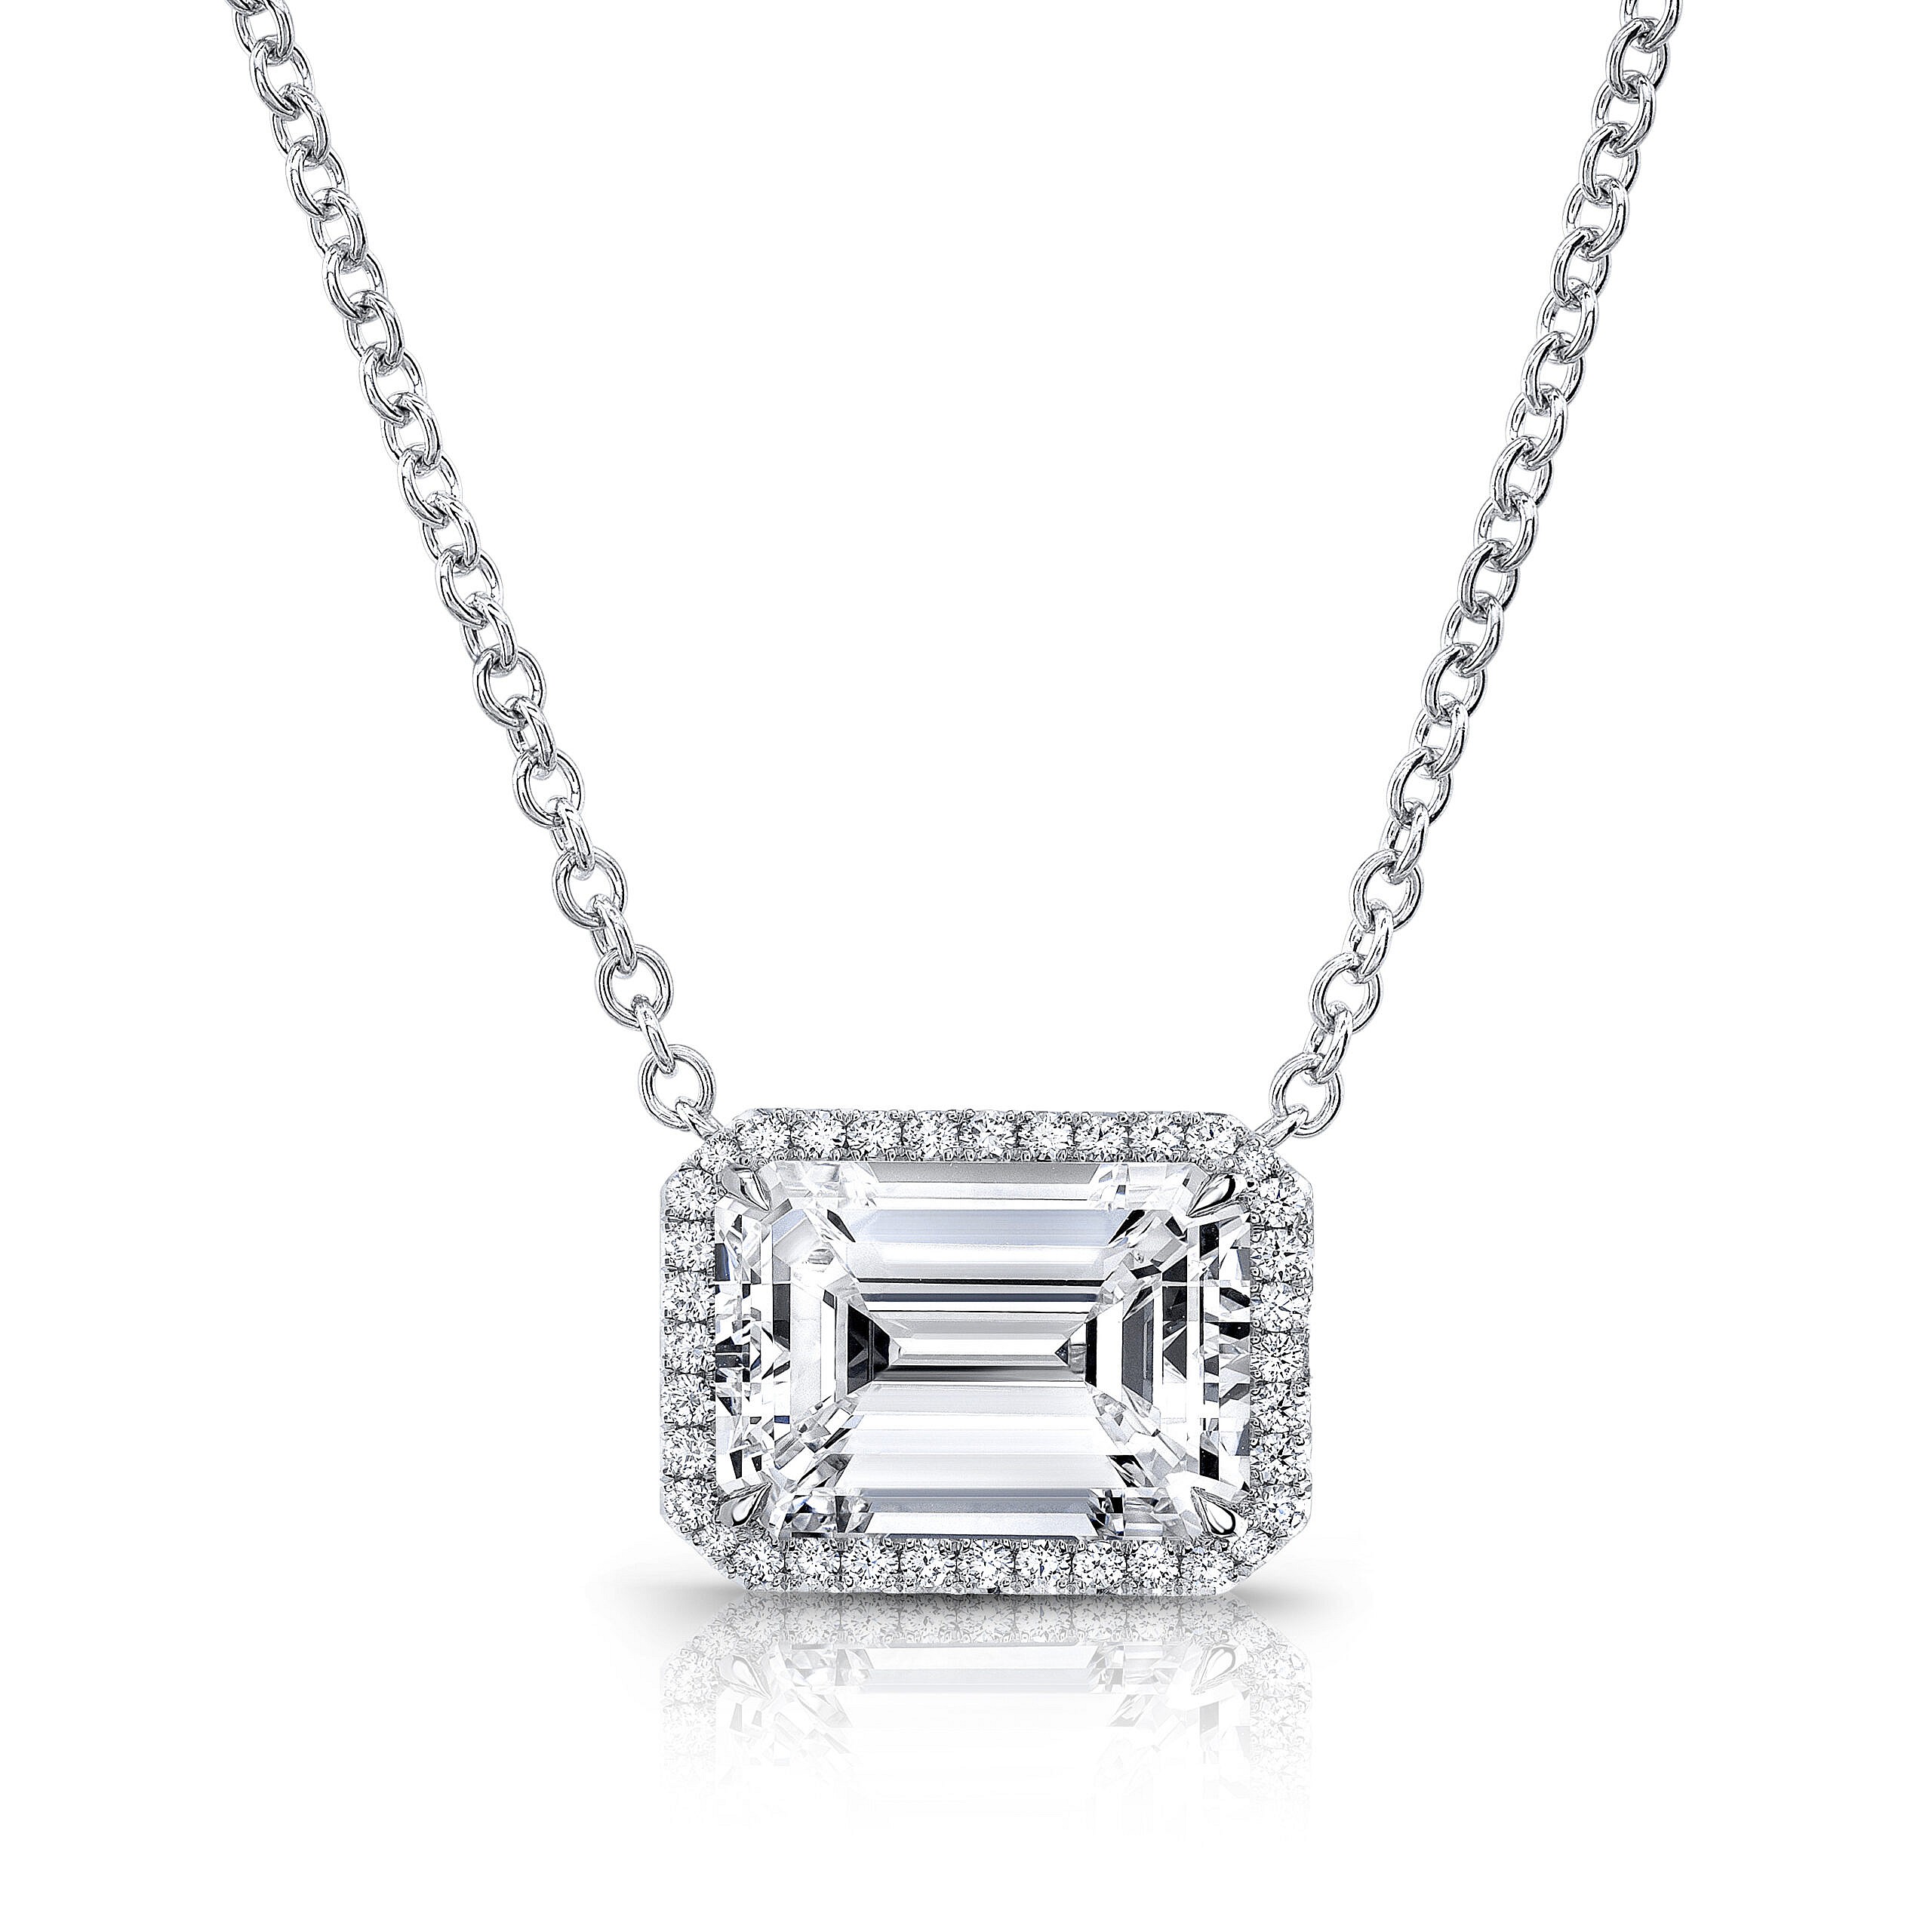 Emerald Cut Solitaire White Gold Mangalsutra - JD SOLITAIRE